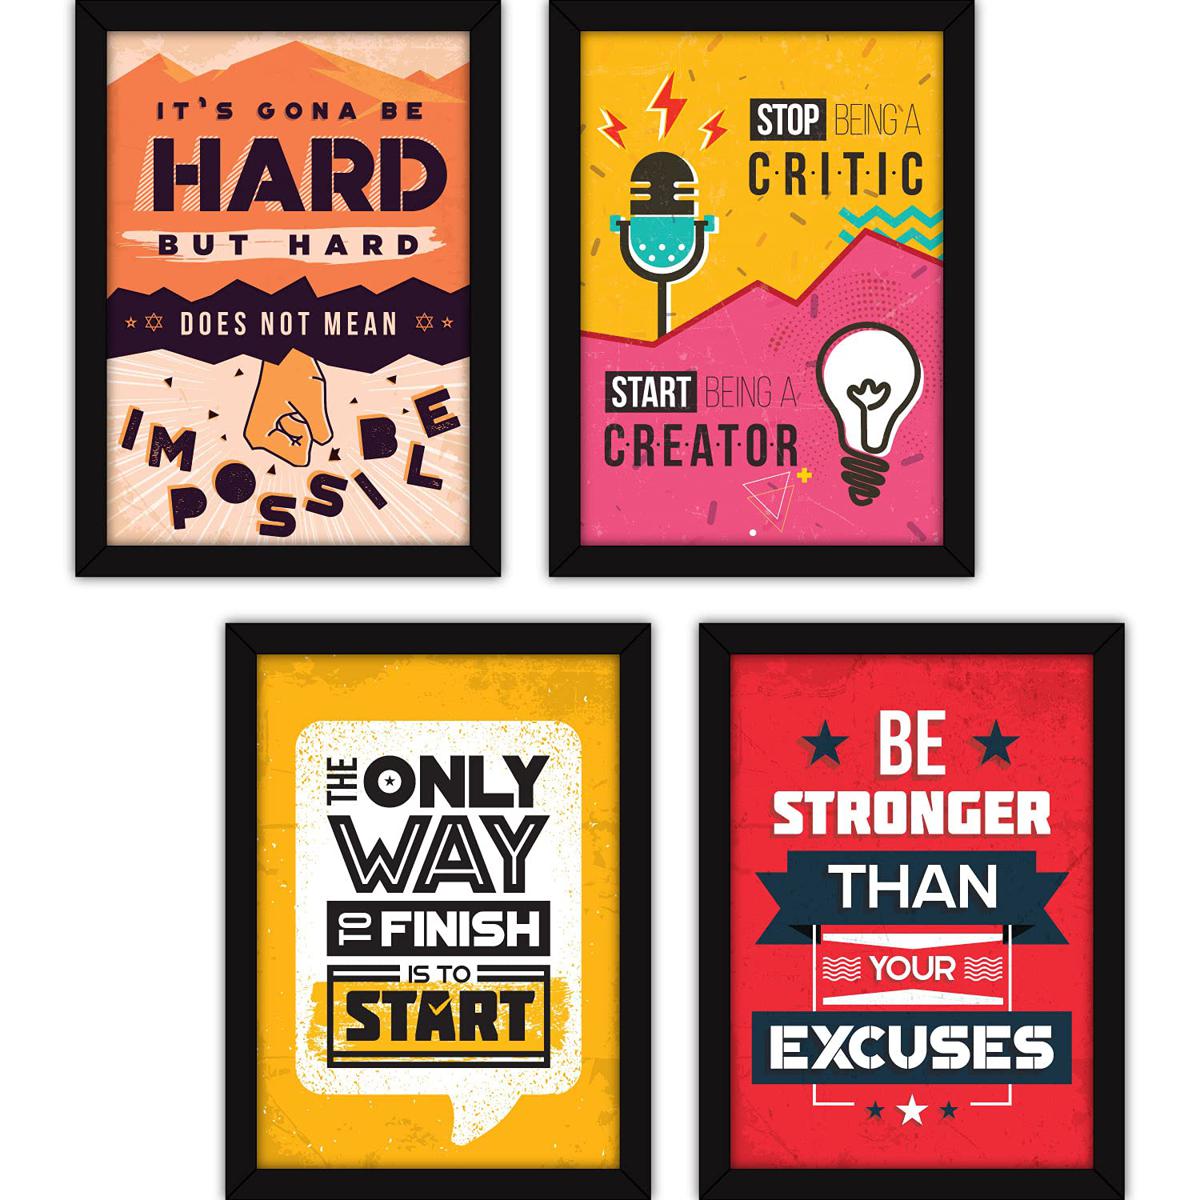 Set of 4 Motivational Quotes Wall Hanging Frames